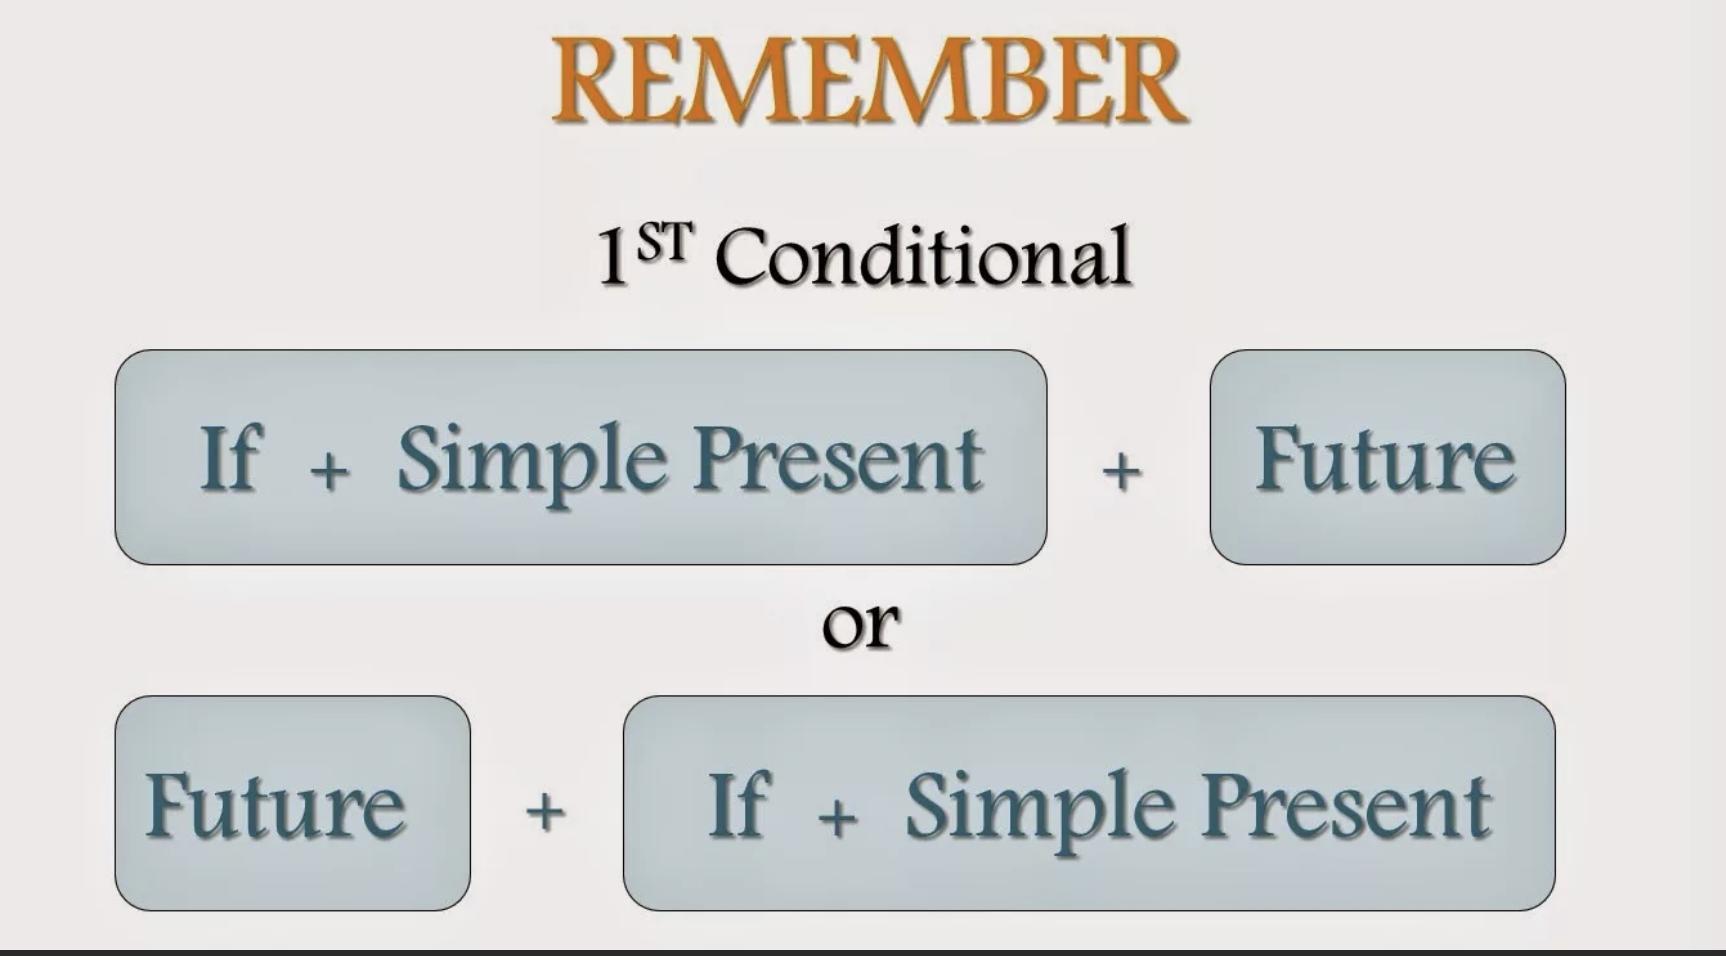 Condition meaning. 1st conditional формула. First conditional. Conditional 1. First conditional правило.